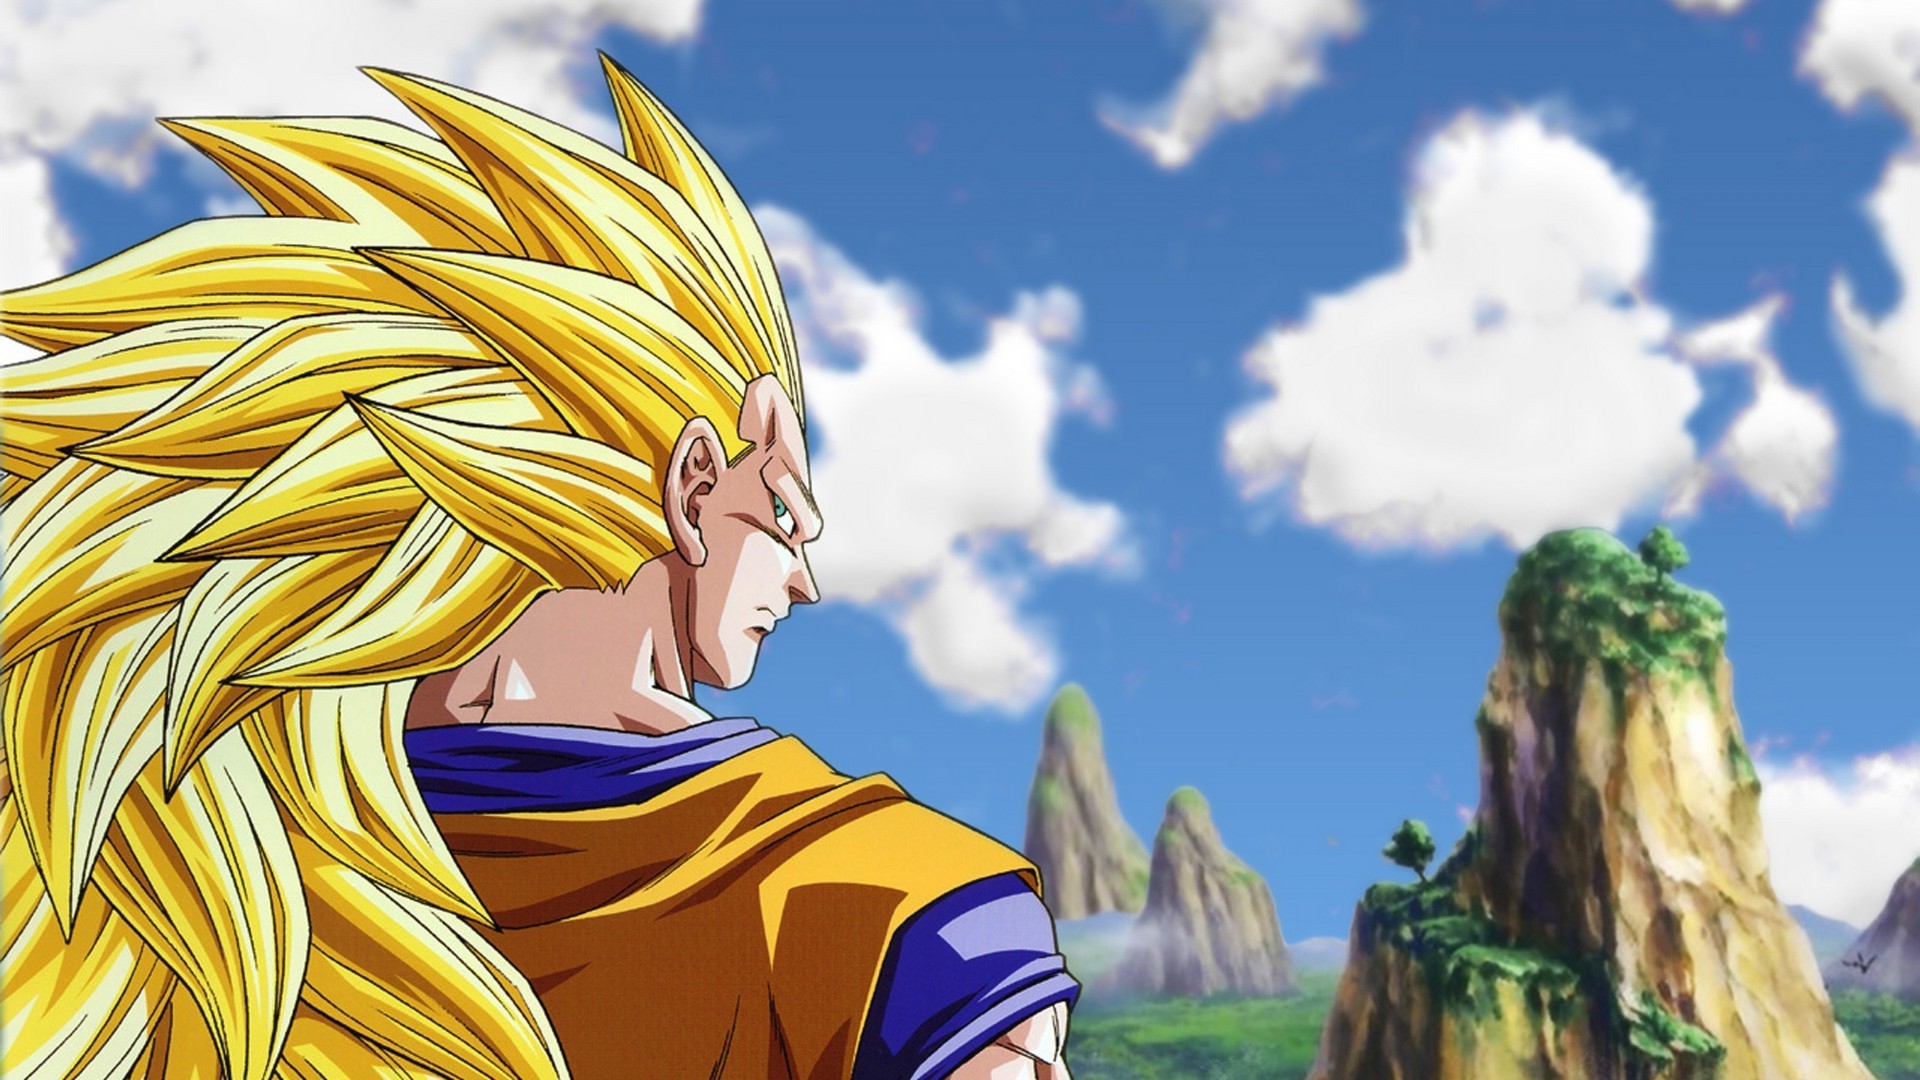 Goku SSJ3 Desktop Backgrounds with image resolution 1920x1080 pixel. You can make this wallpaper for your Desktop Computer Backgrounds, Mac Wallpapers, Android Lock screen or iPhone Screensavers